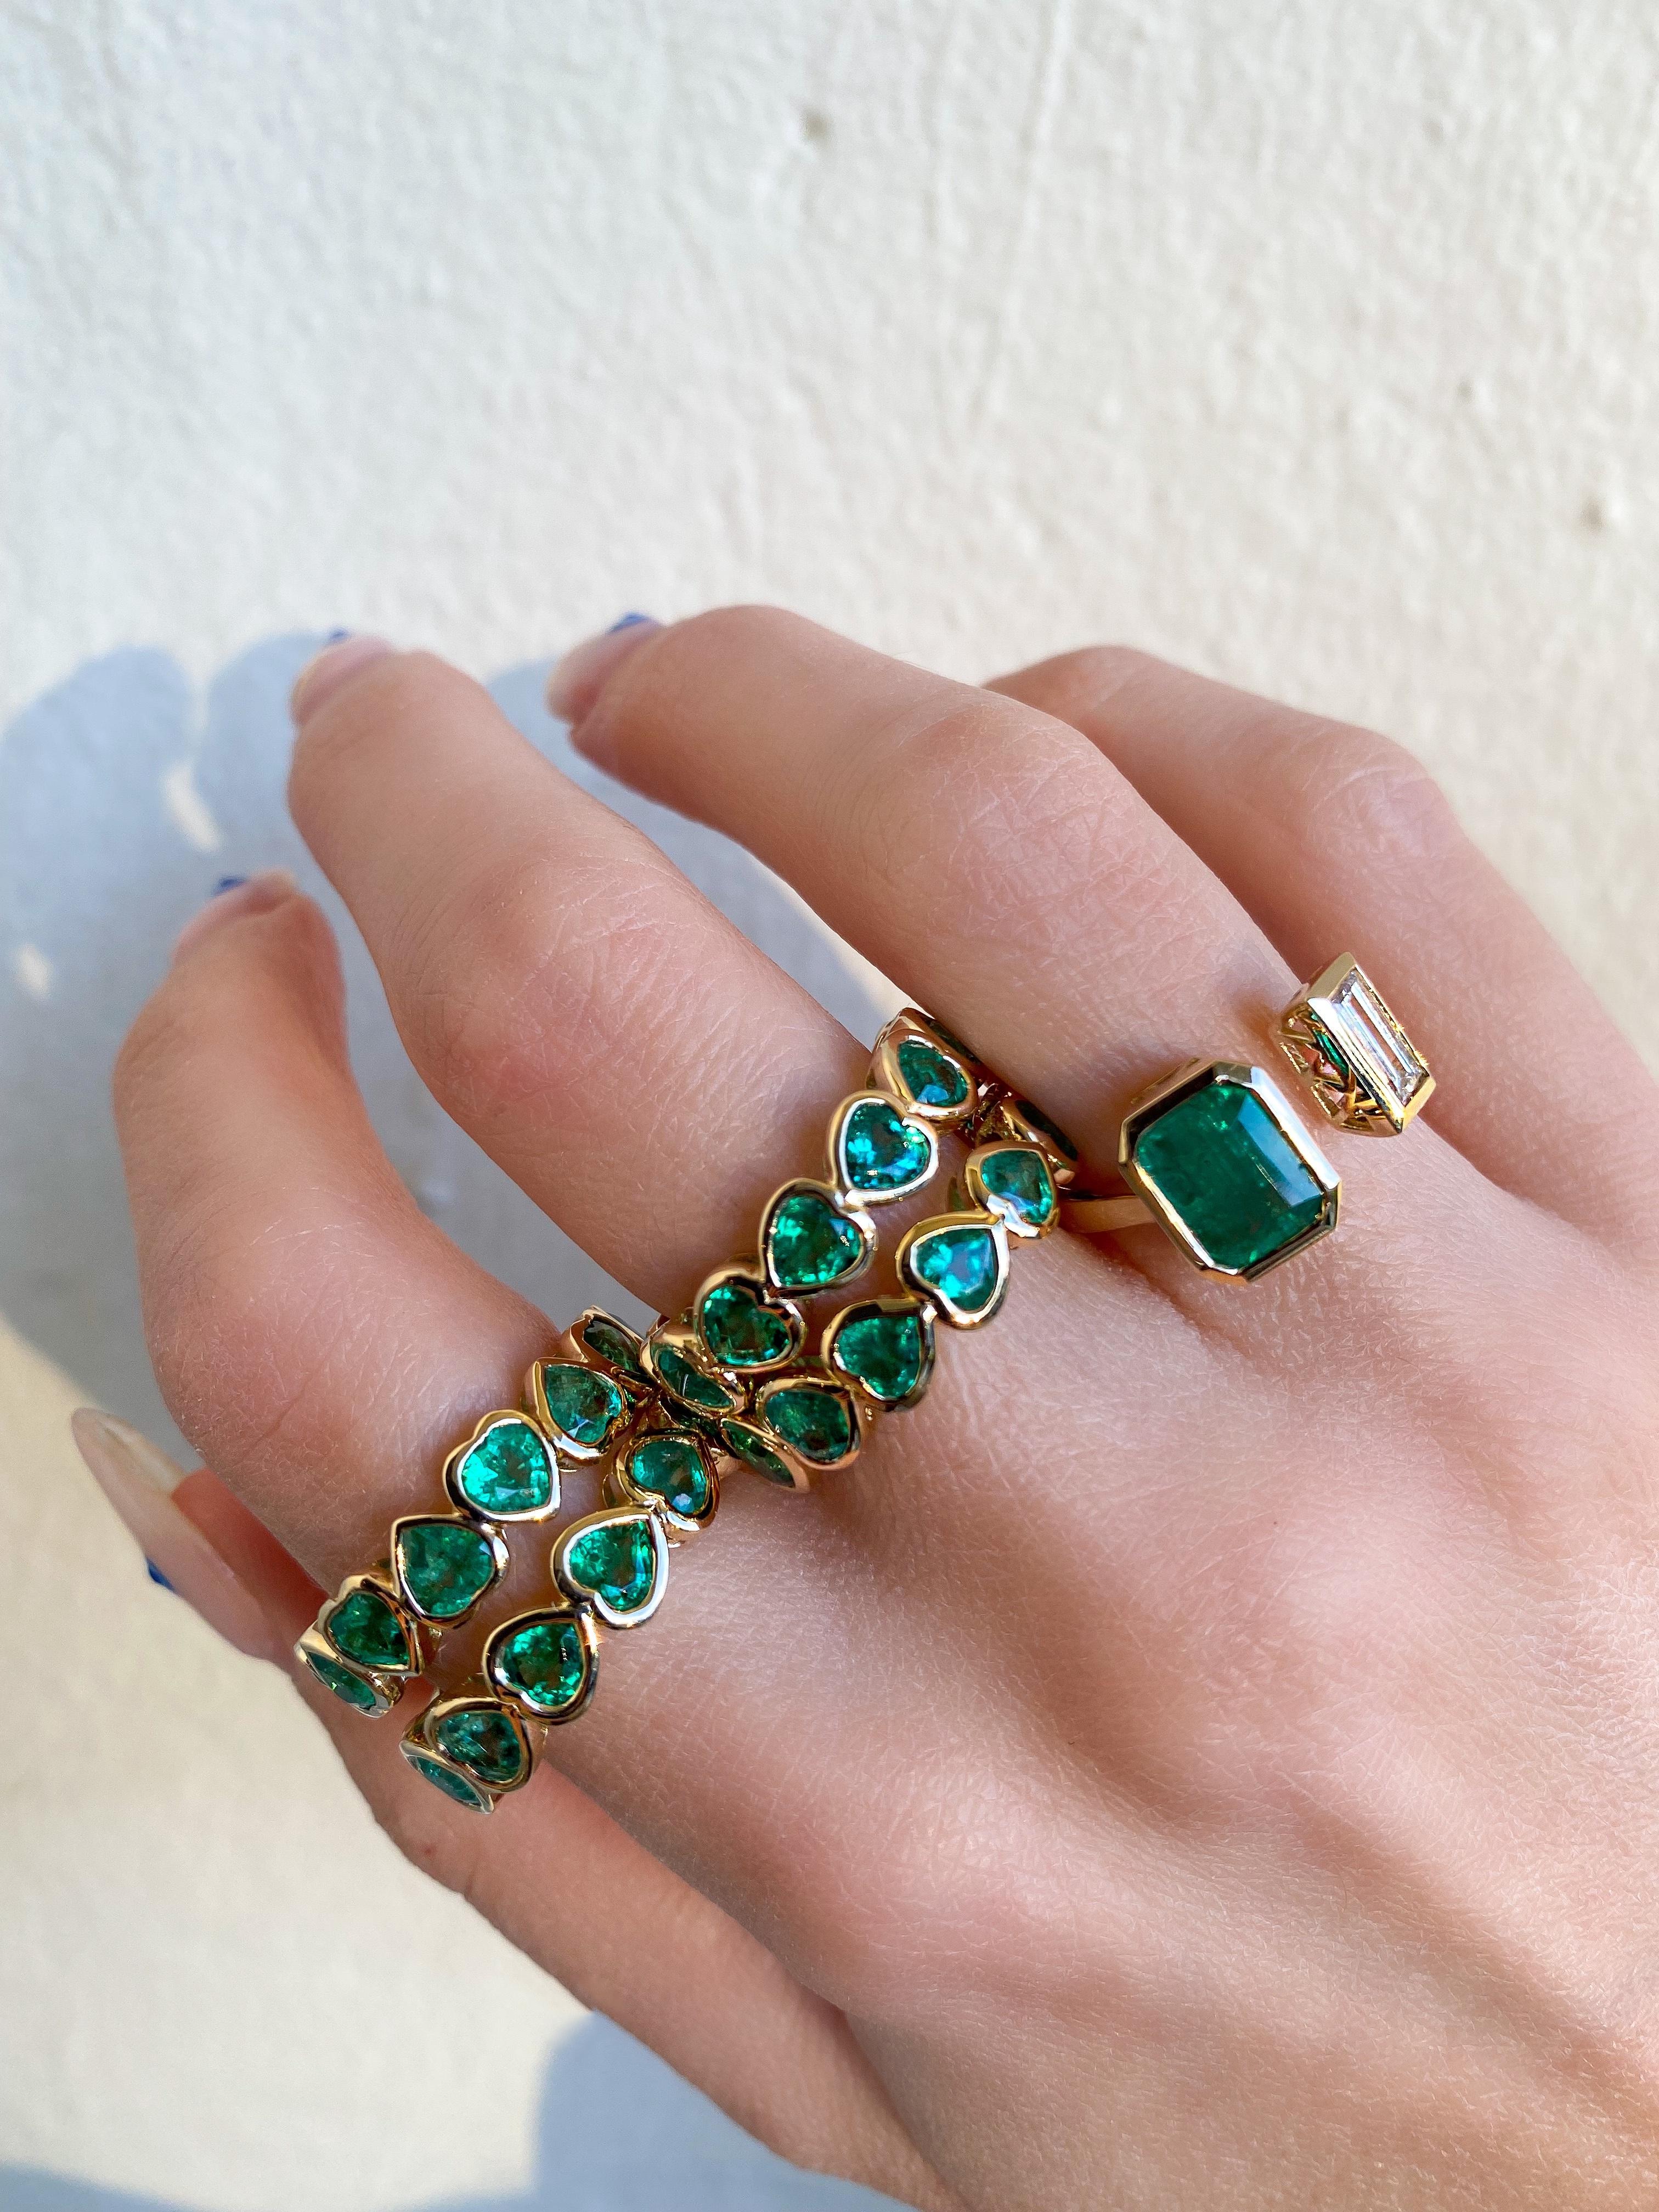 - 3.63 cts of emeralds on average. 
- Size 6-6.5 available
- 14k and 18k yellow gold available